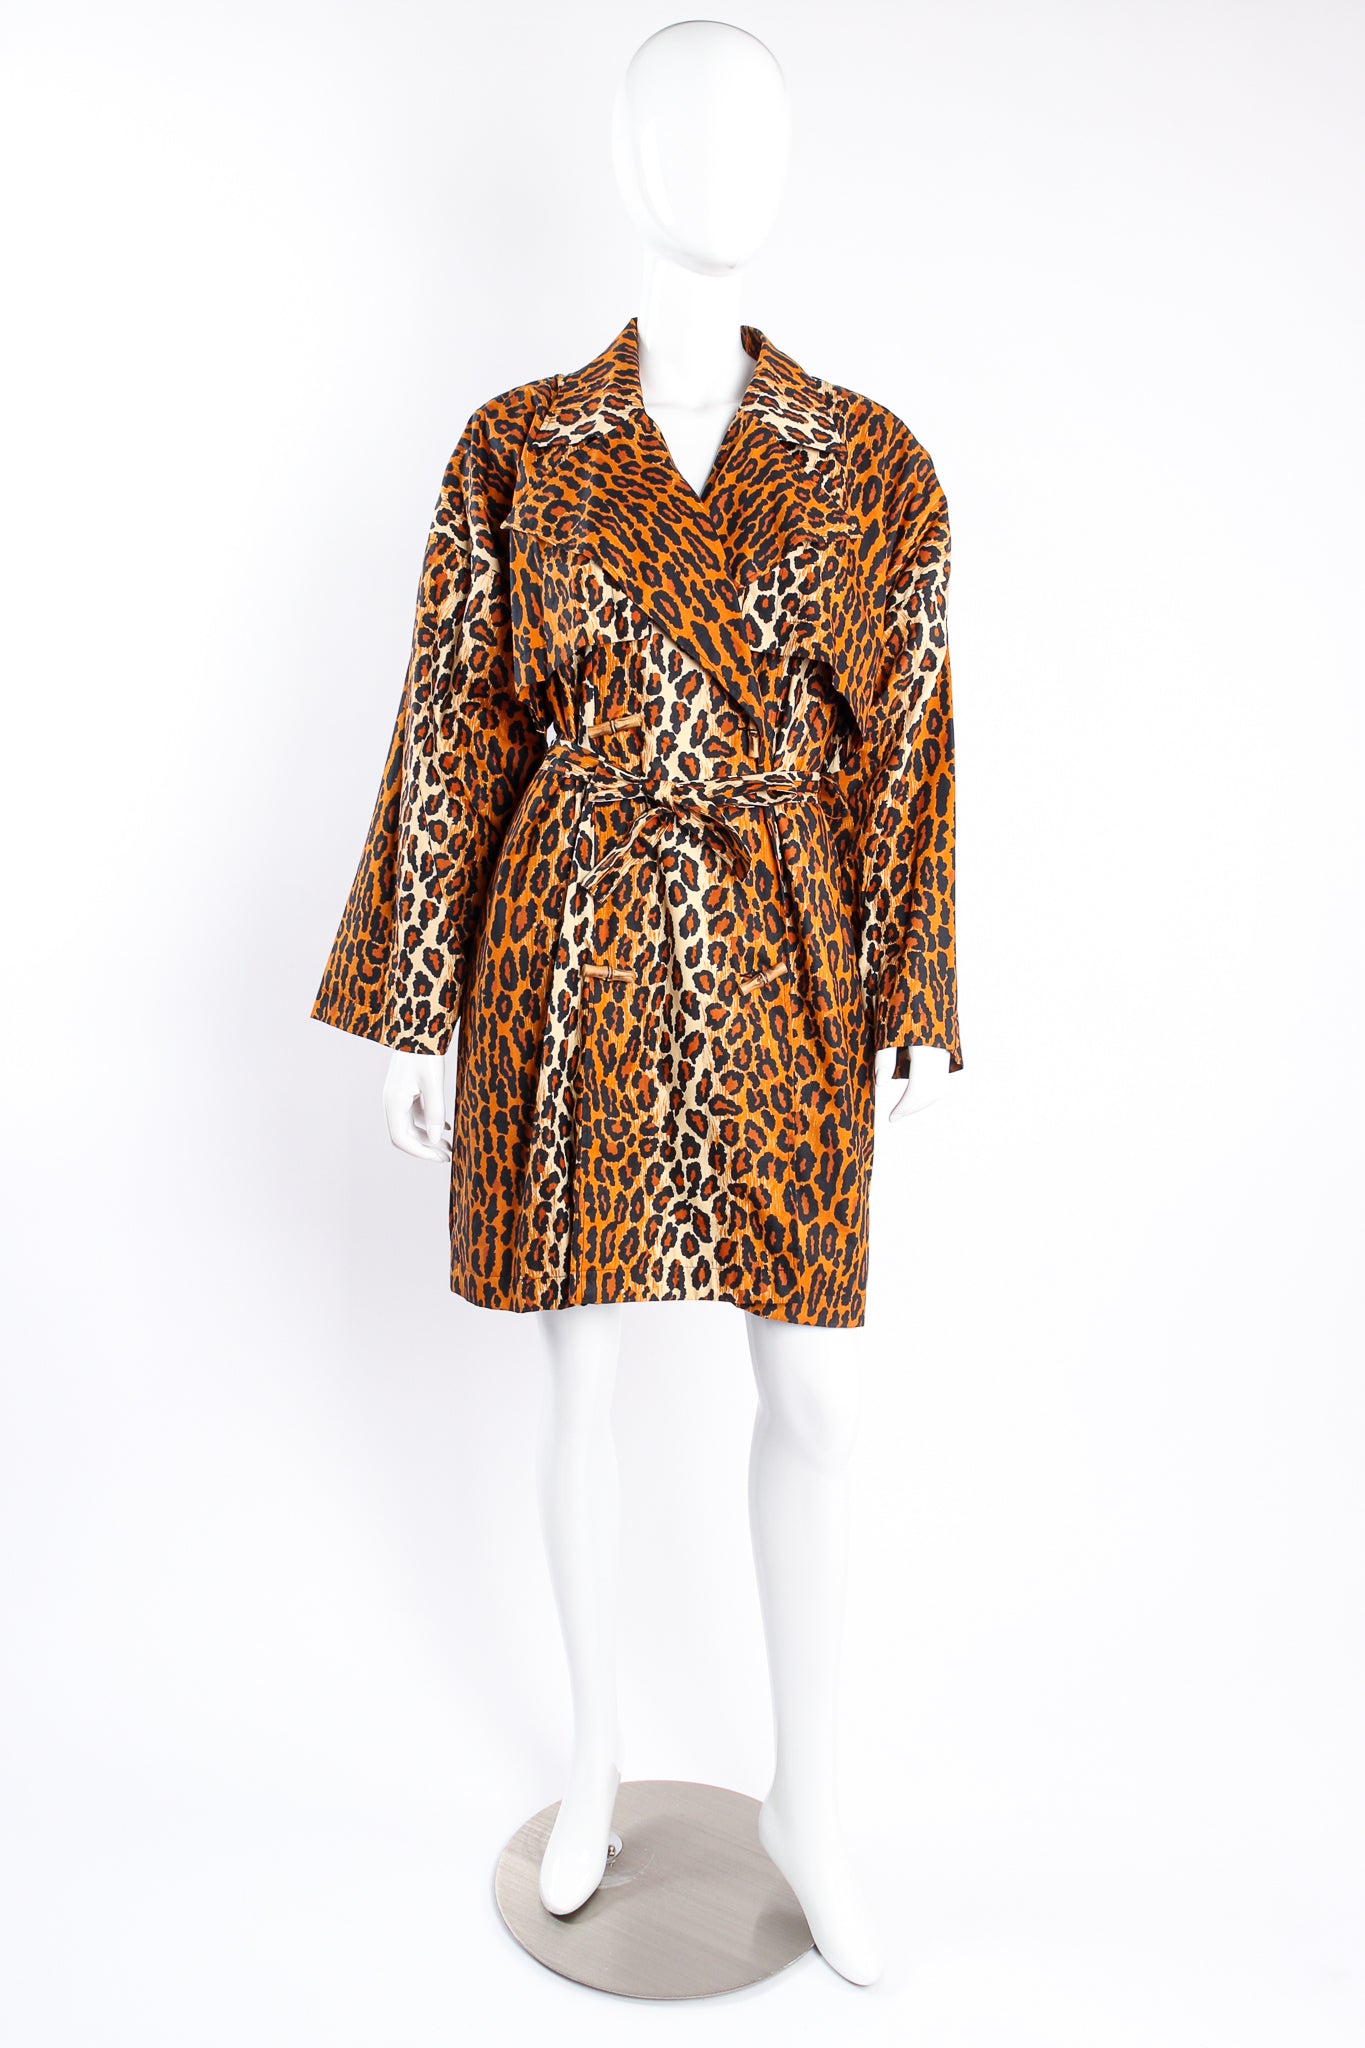 Vintage Patrick Kelly SS 1989 Runway Leopard Trench Coat on Mannequin front at Recess Los Angeles